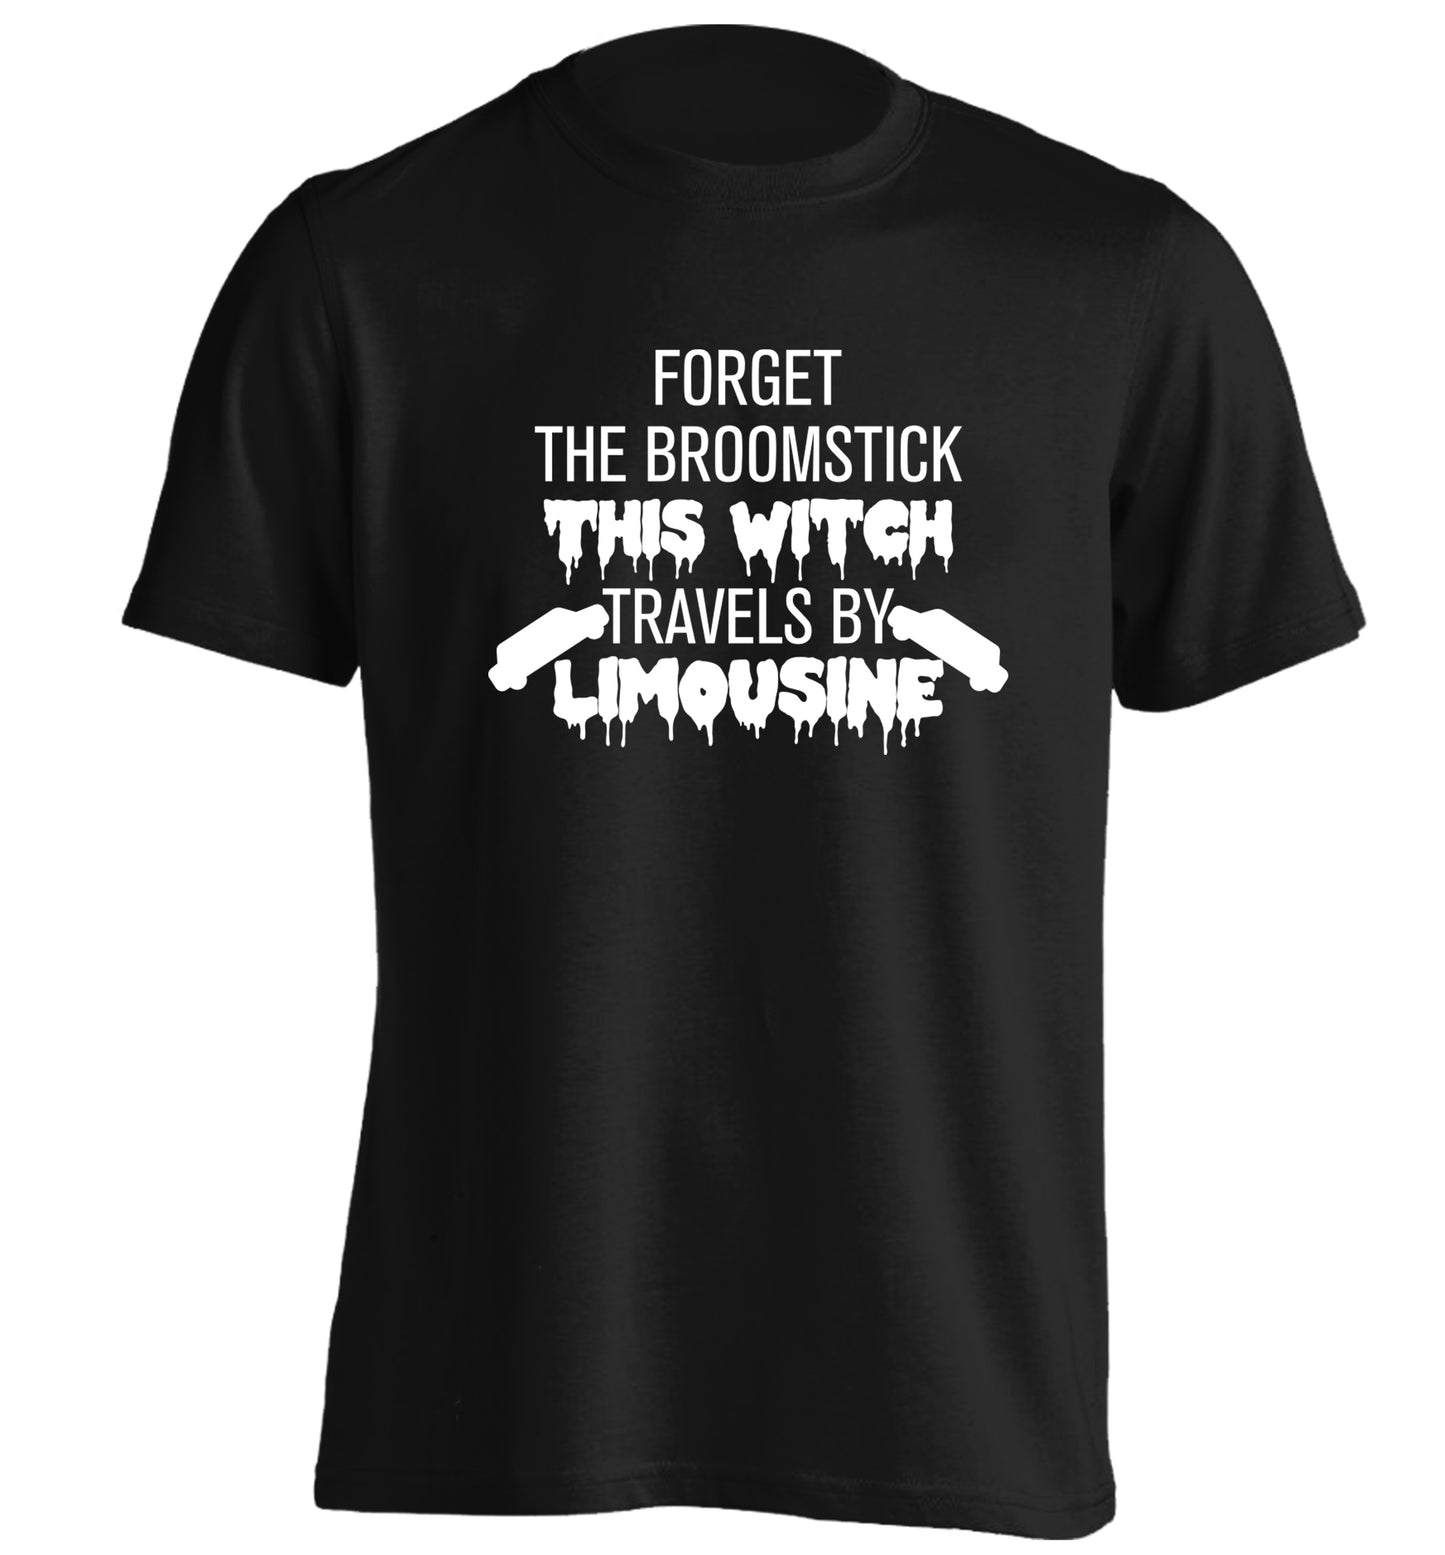 Forget the broomstick this witch travels by limousine adults unisexblack Tshirt 2XL